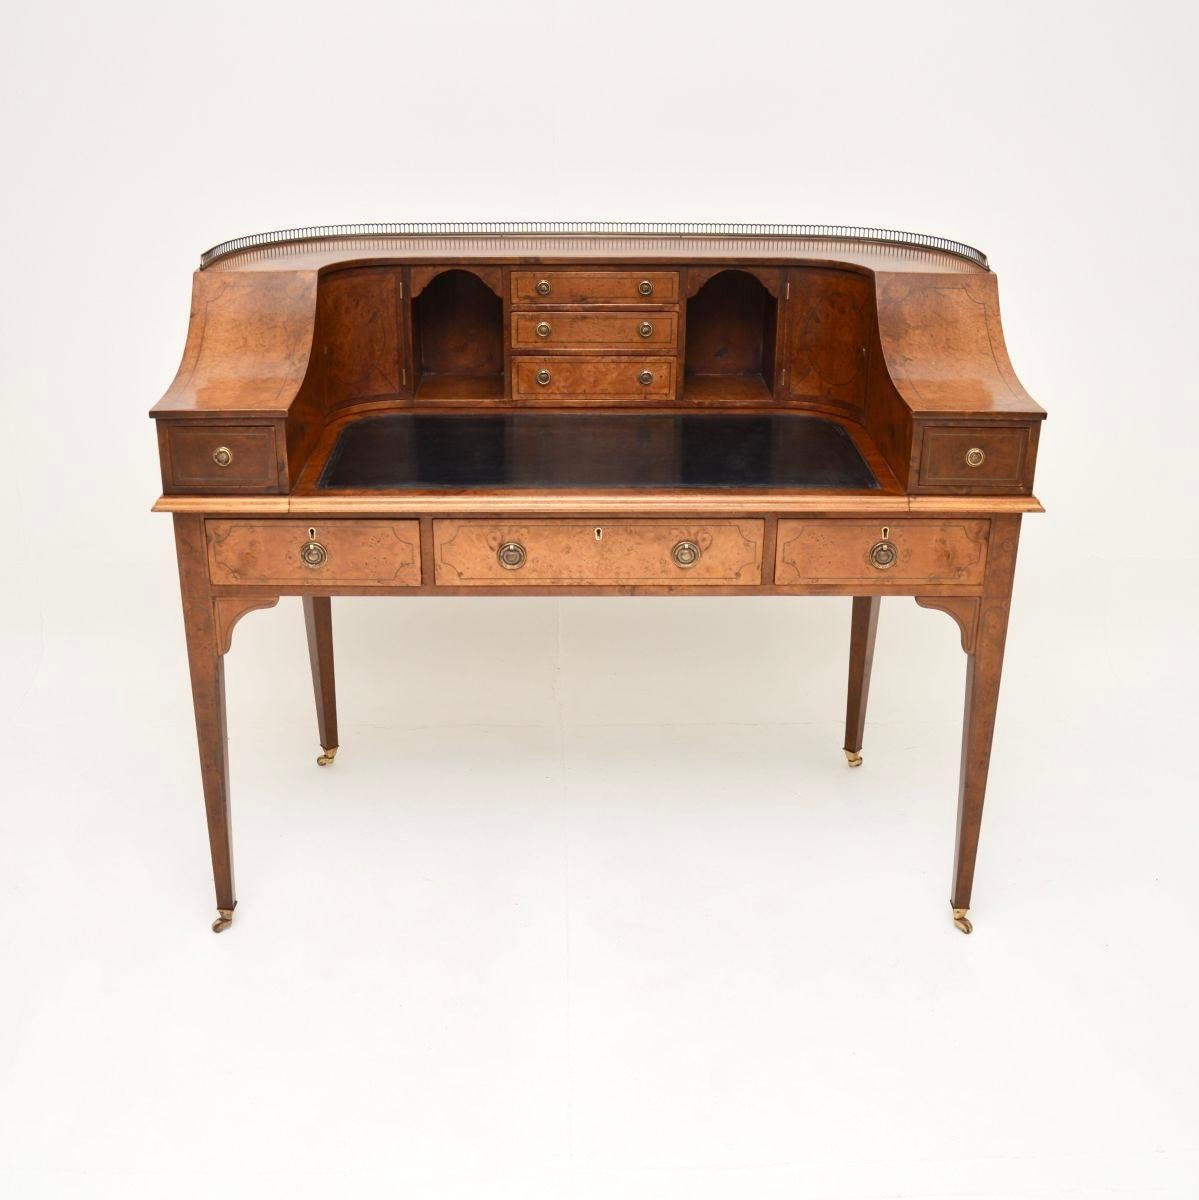 A superb antique burr walnut Carlton House desk, made in England and dating from around the 1890-1910 period.

This is of outstanding quality with many lovely features. It is a great size, with lots of storage space in the curved upper section and